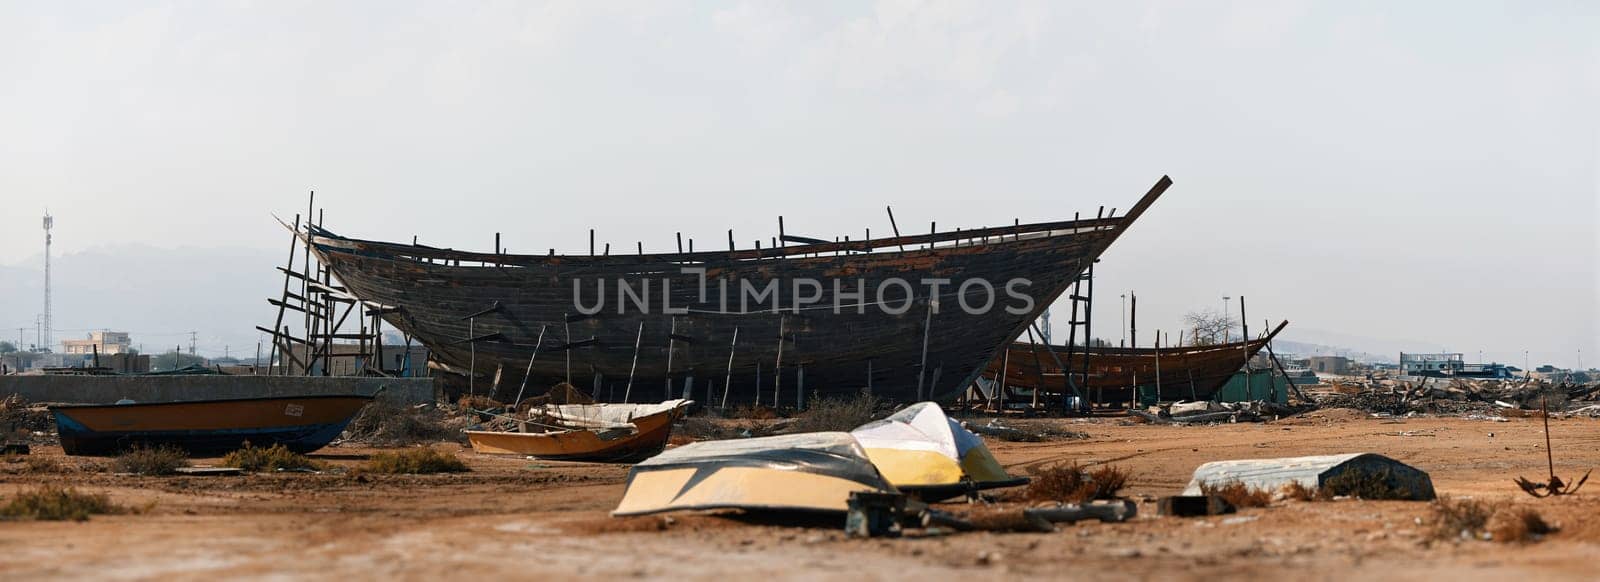 Construction of a wooden ship. Shipyard of traditional Dhow wooden boat on Iranian Qeshm Island. Tradition Lenj Fishing Boat in Qeshm Island in Southern Iran. Old wooden stealth smuggler's ship by EvgeniyQW